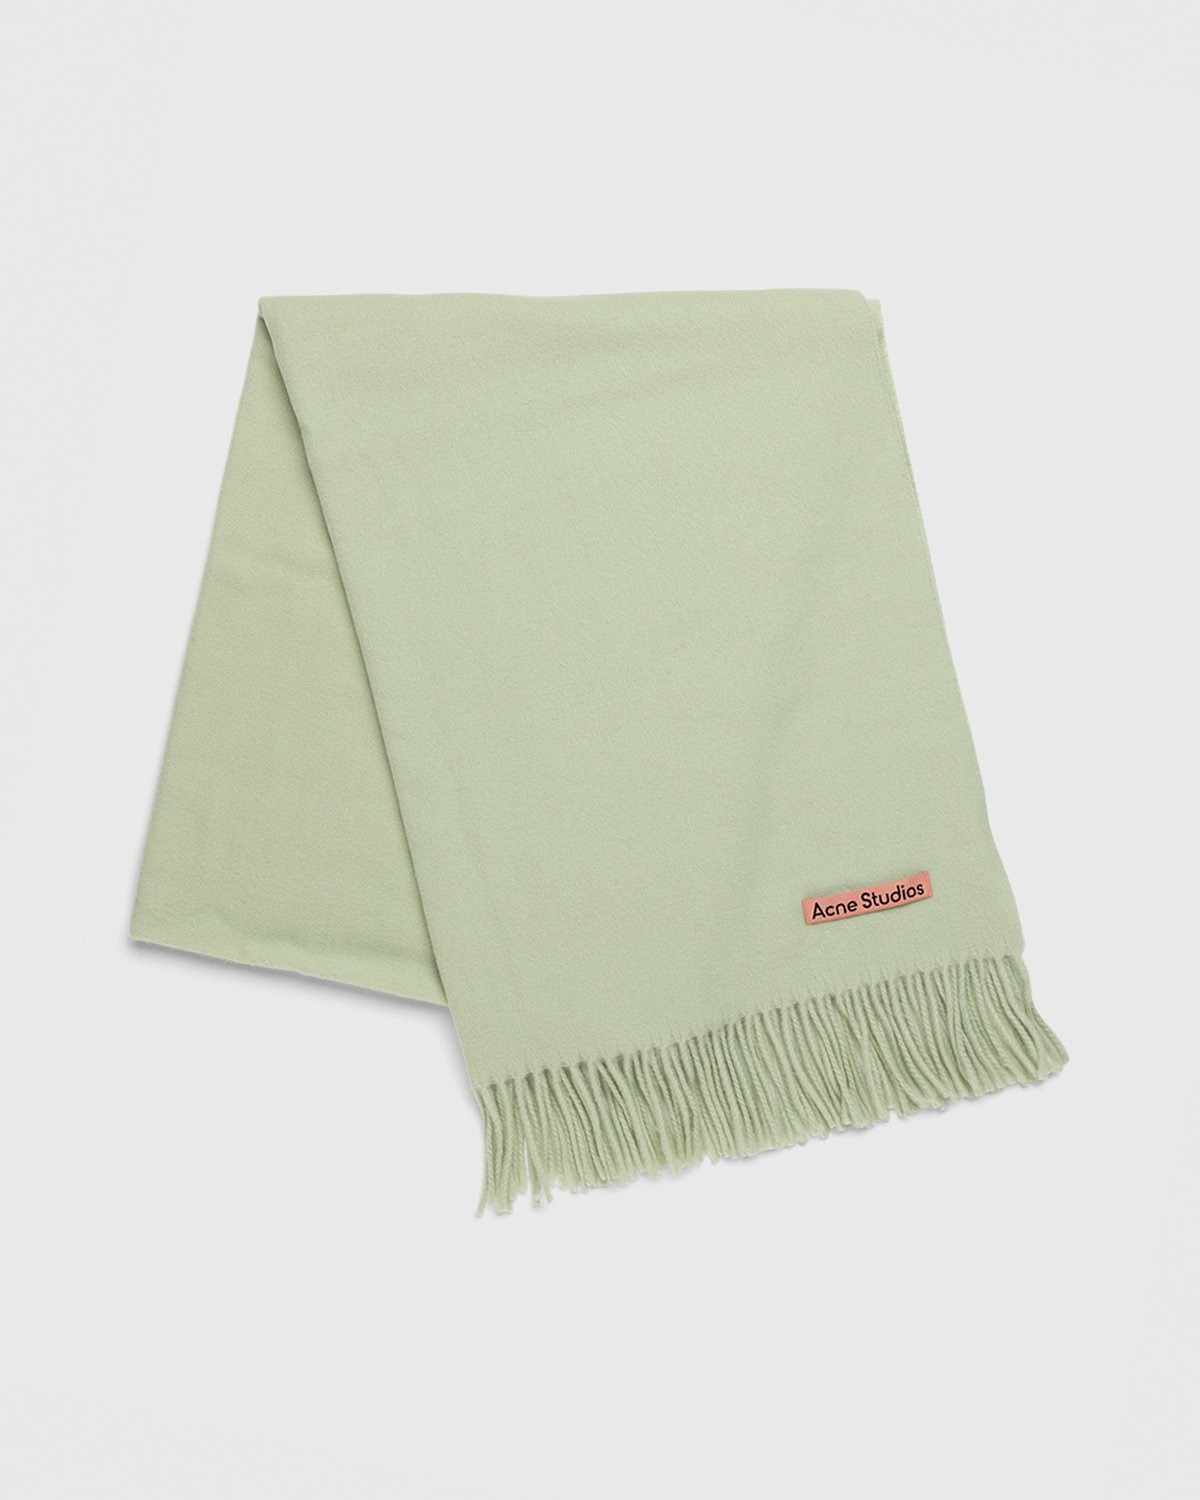 Acne Studios – Canada New Scarf Pale Green - Scarves - Green - Image 1